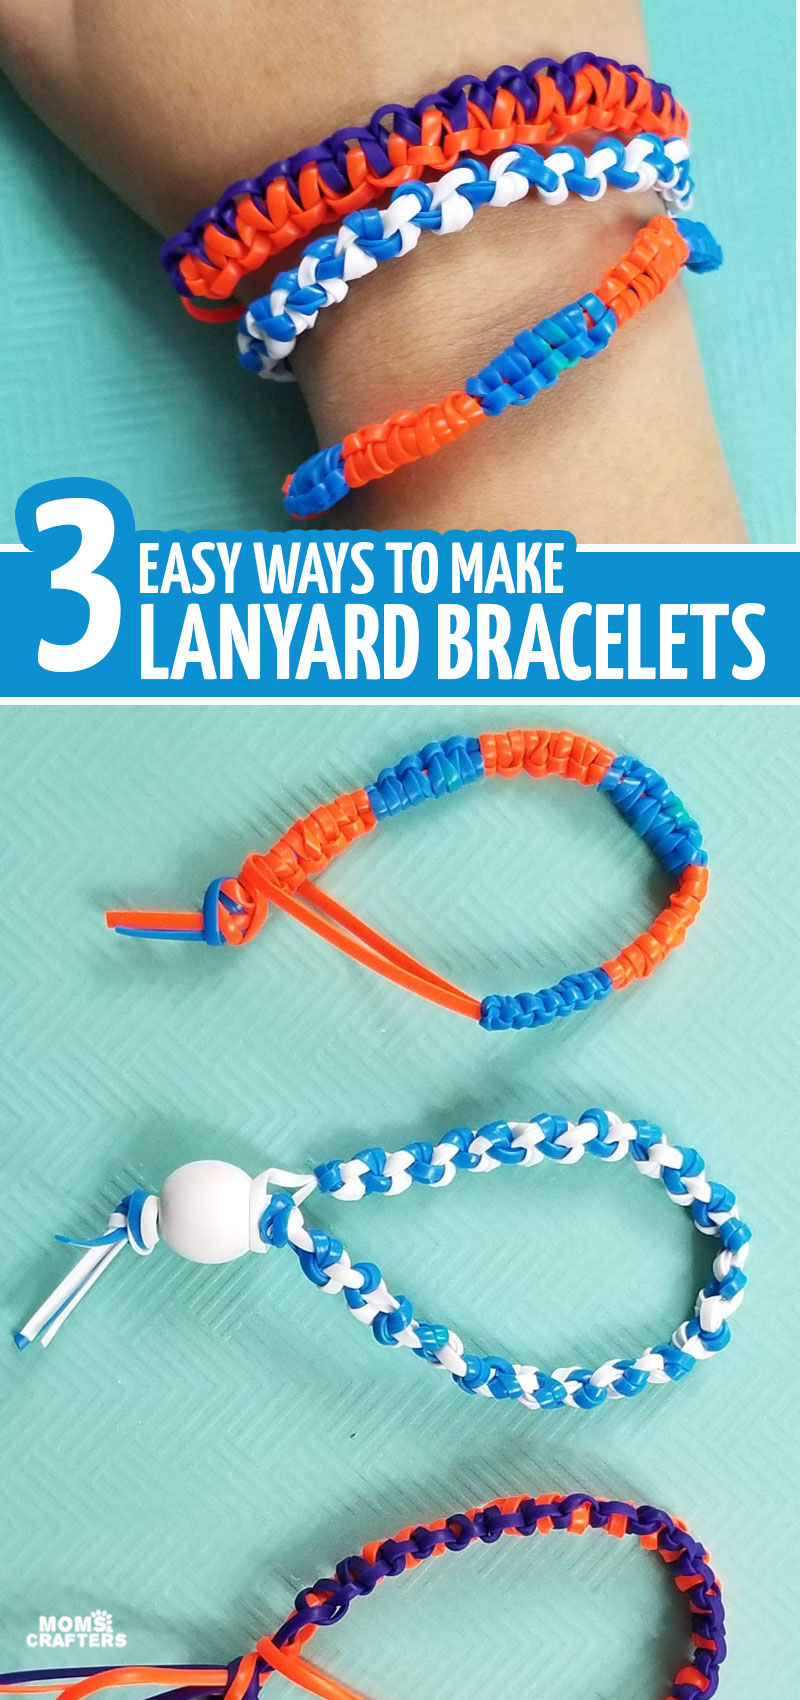 How to finish a bead bracelet  6 easy ways  The Pretty Life Girls